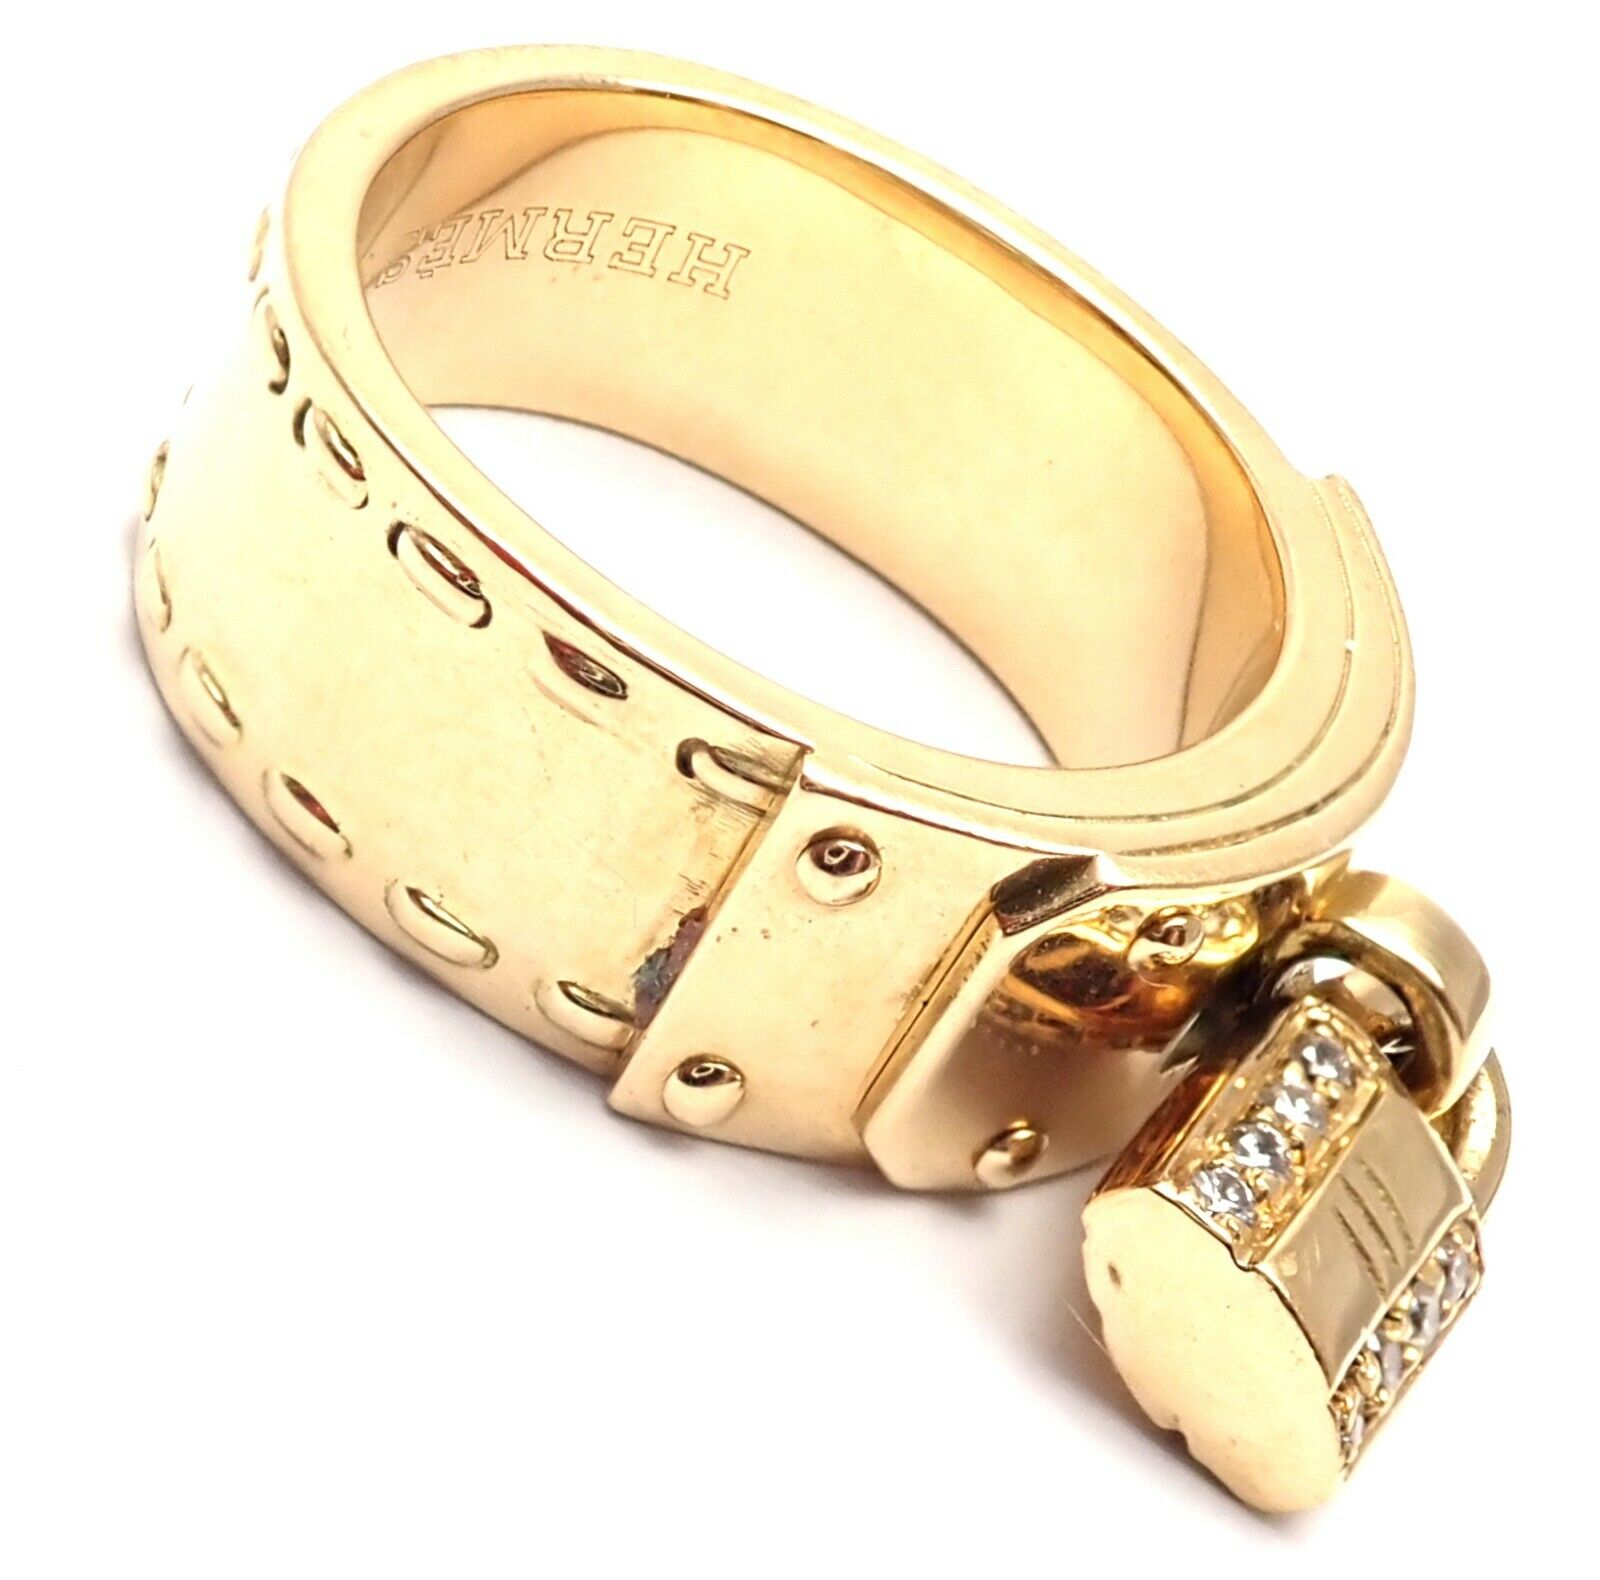 Hermes Jewelry & Watches:Fine Jewelry:Rings Rare! Authentic Hermes 18k Yellow Gold Diamond "H" Lock Band Ring Size 50